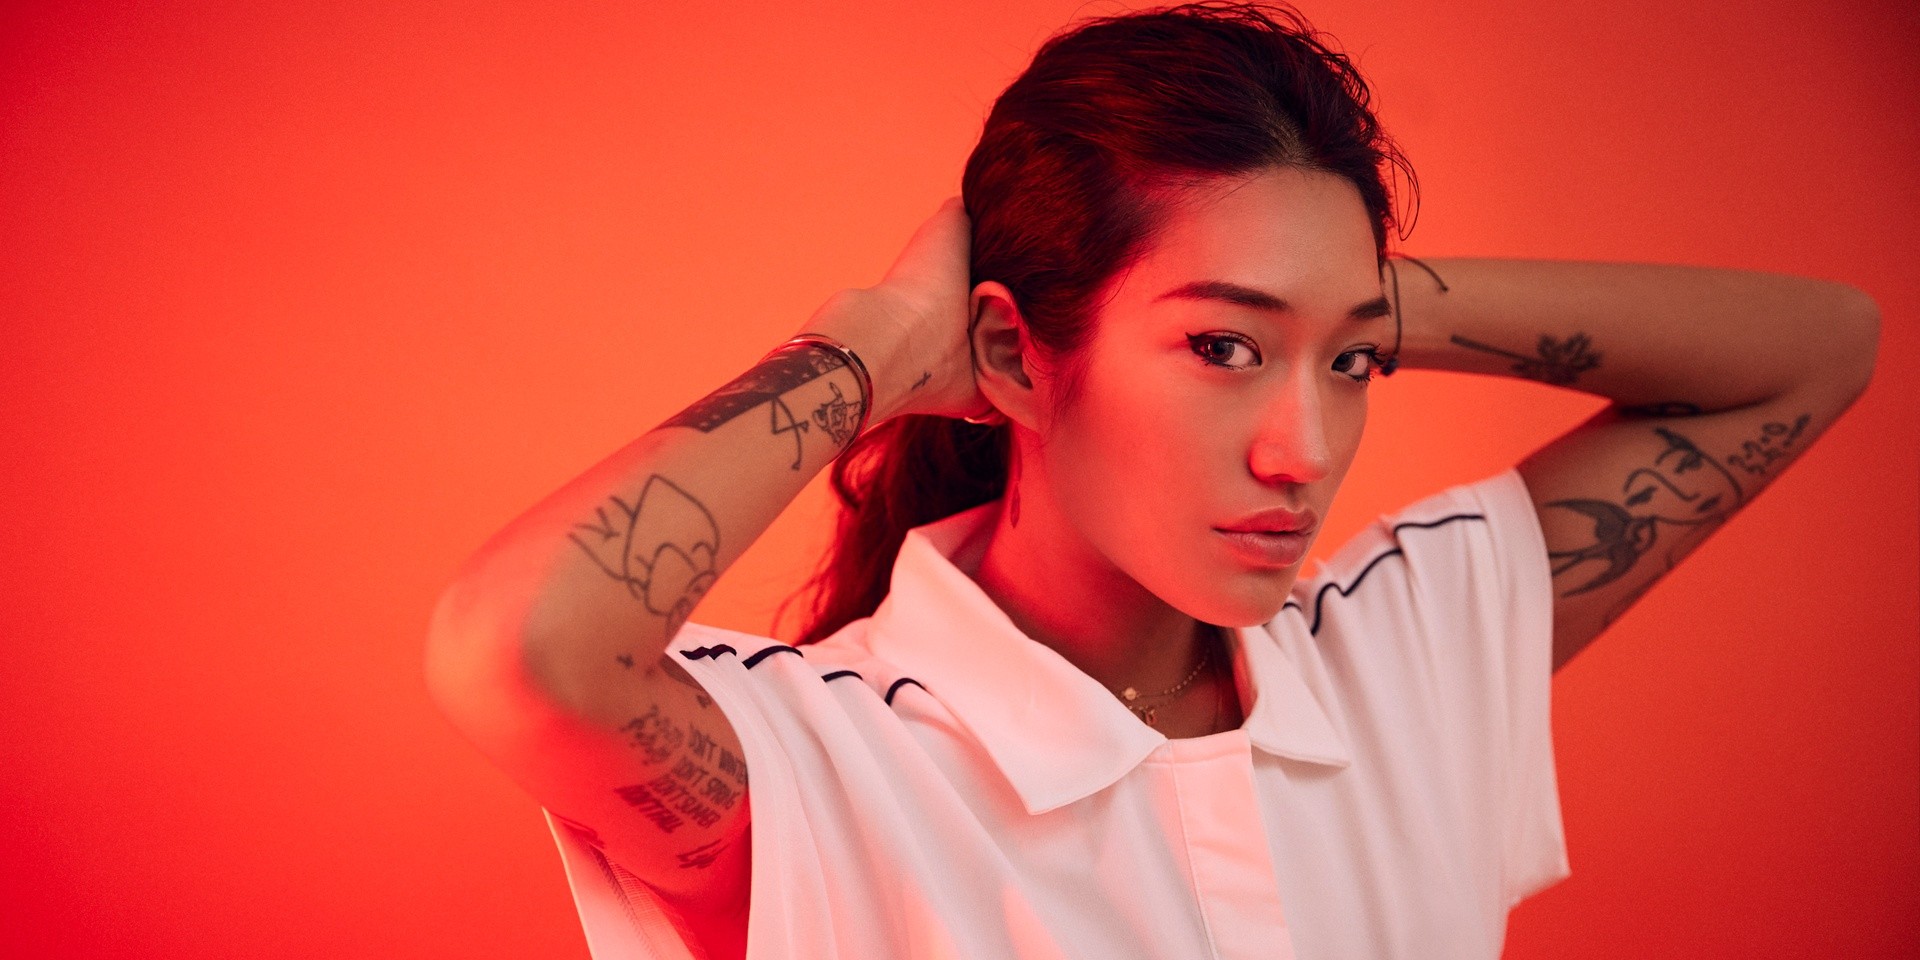 Peggy Gou launches label, premiers new song, 'Starry Night' – listen 